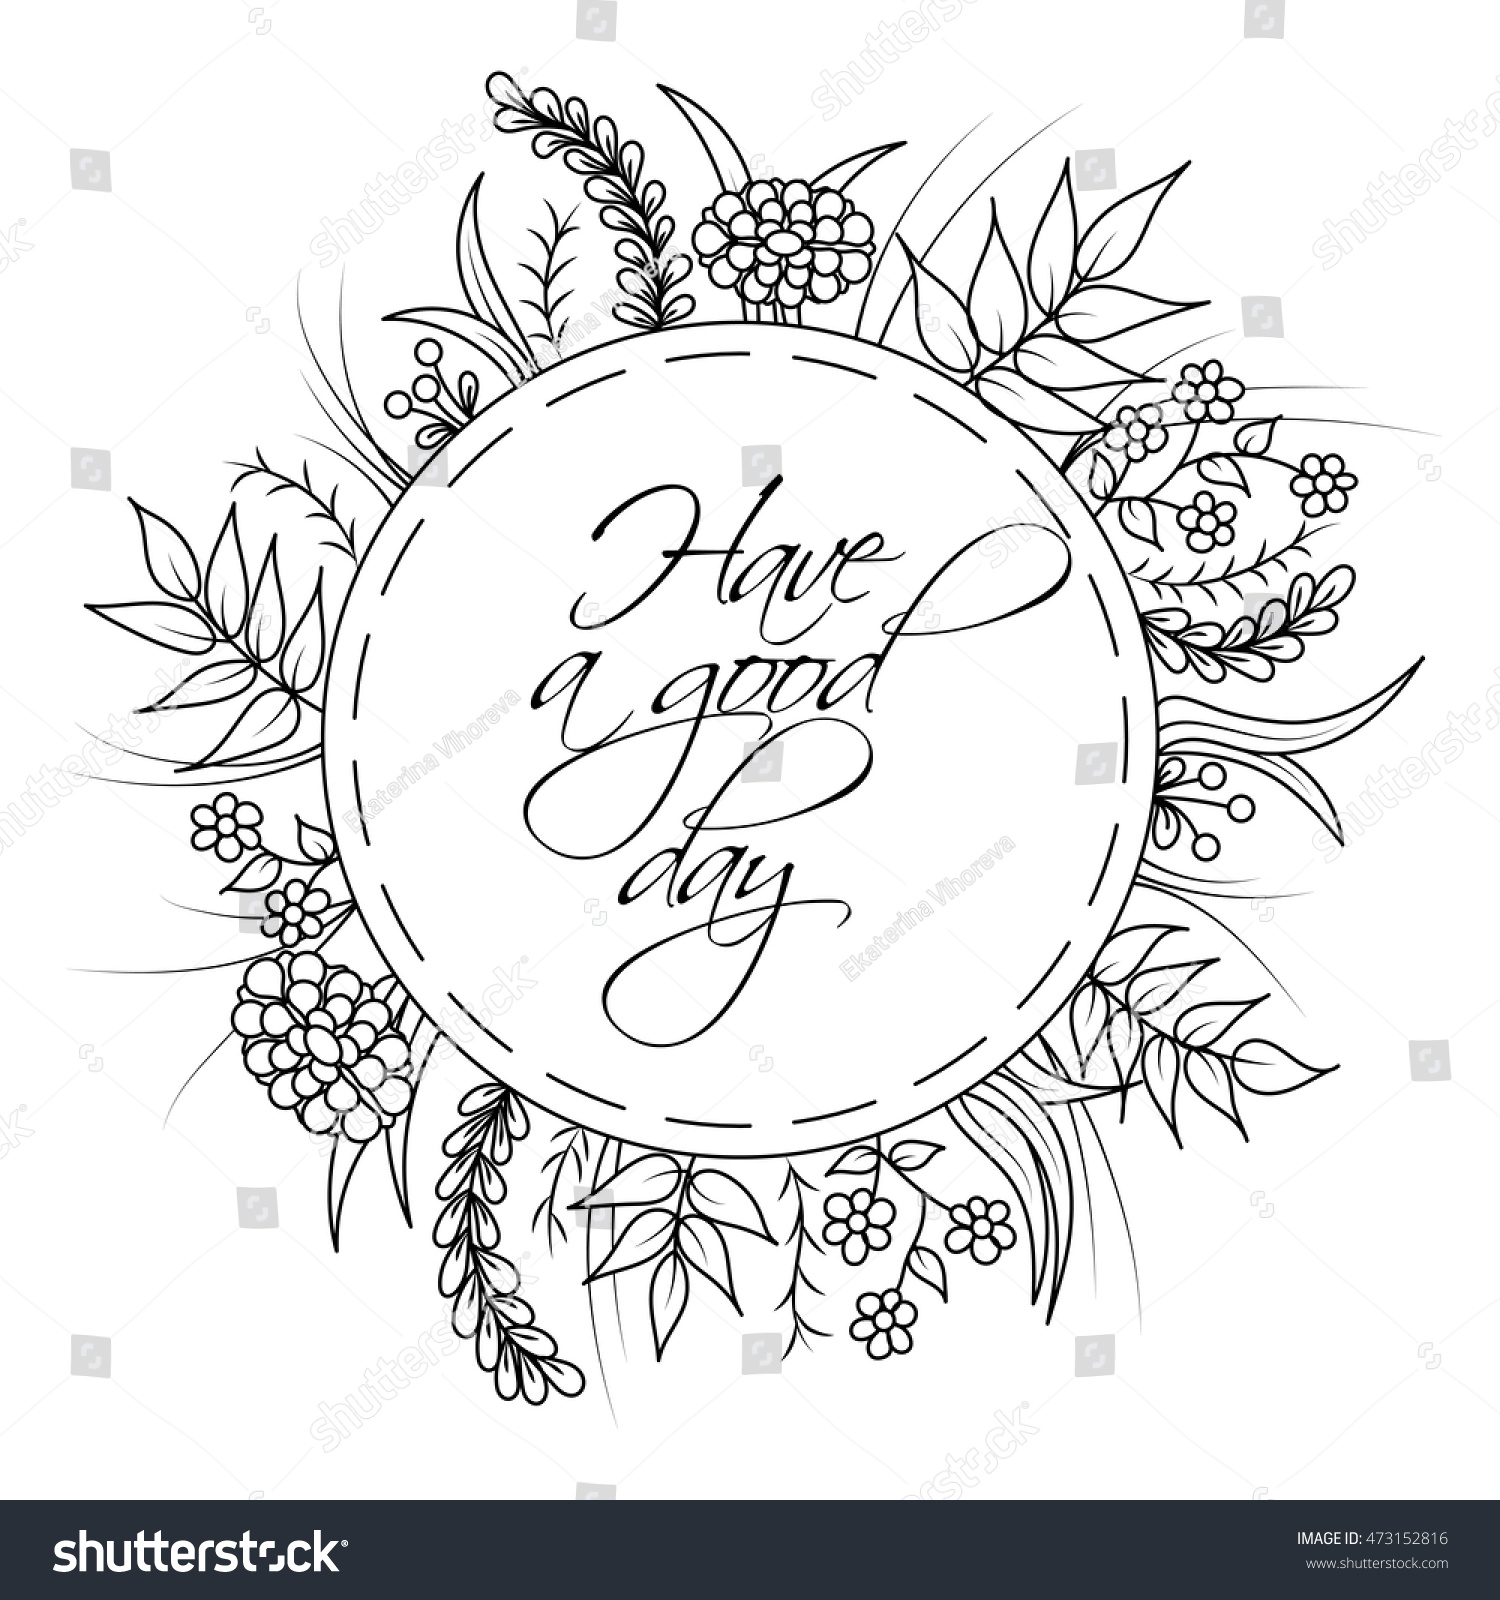 Hand Drawn Wreath Illustration Made Flowers Stock Vector Royalty Free 473152816 7034